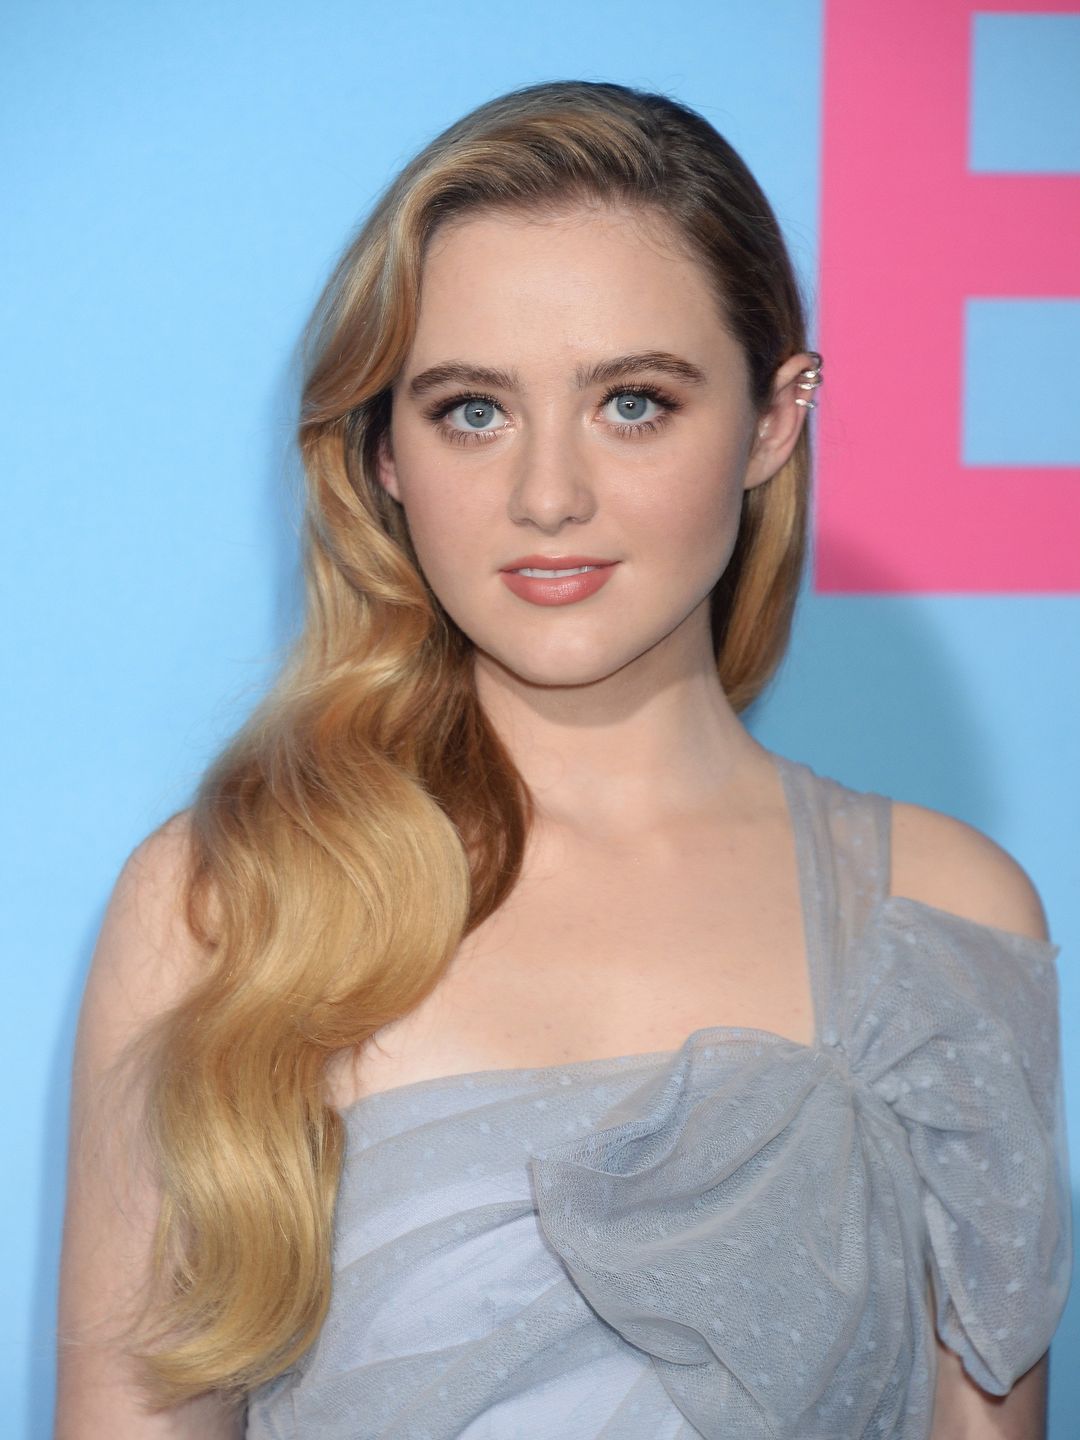 Kathryn Newton who is her mother